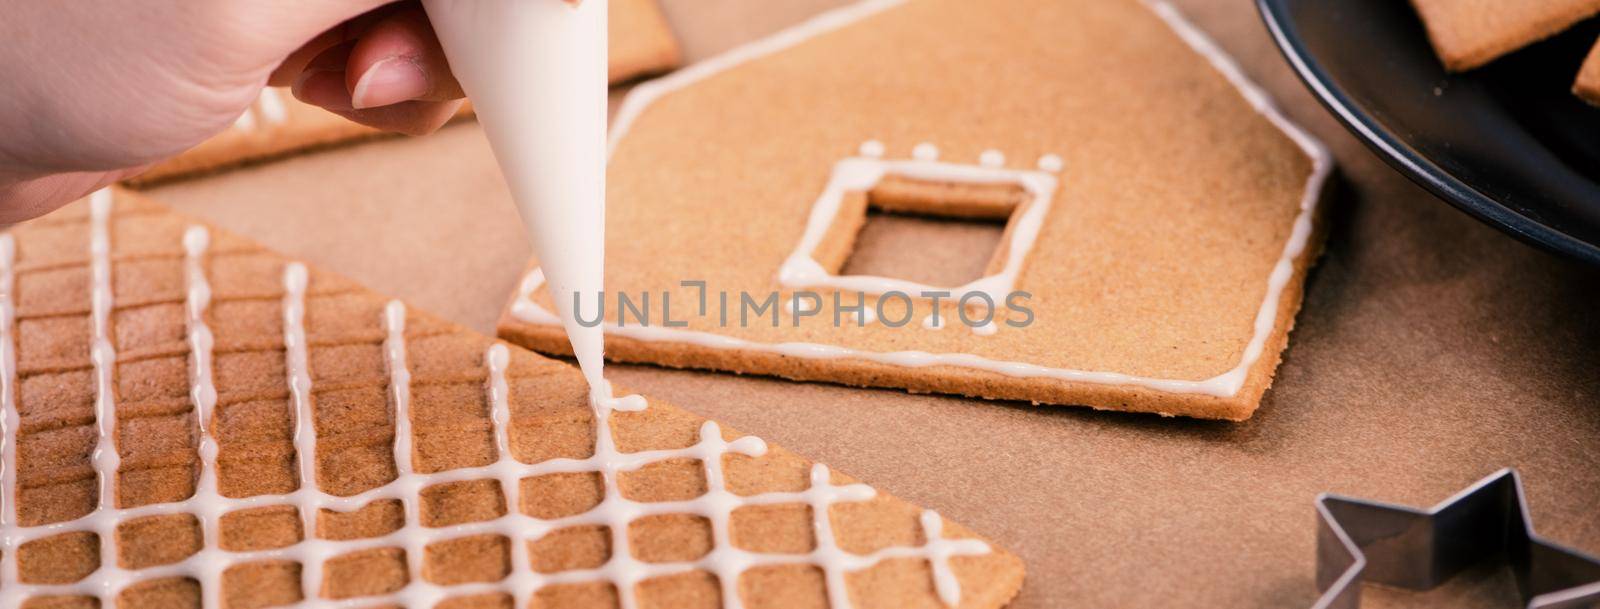 Woman is decorating gingerbread cookies house with white frosting icing cream topping on wooden table background, baking paper in kitchen, close up, macro.